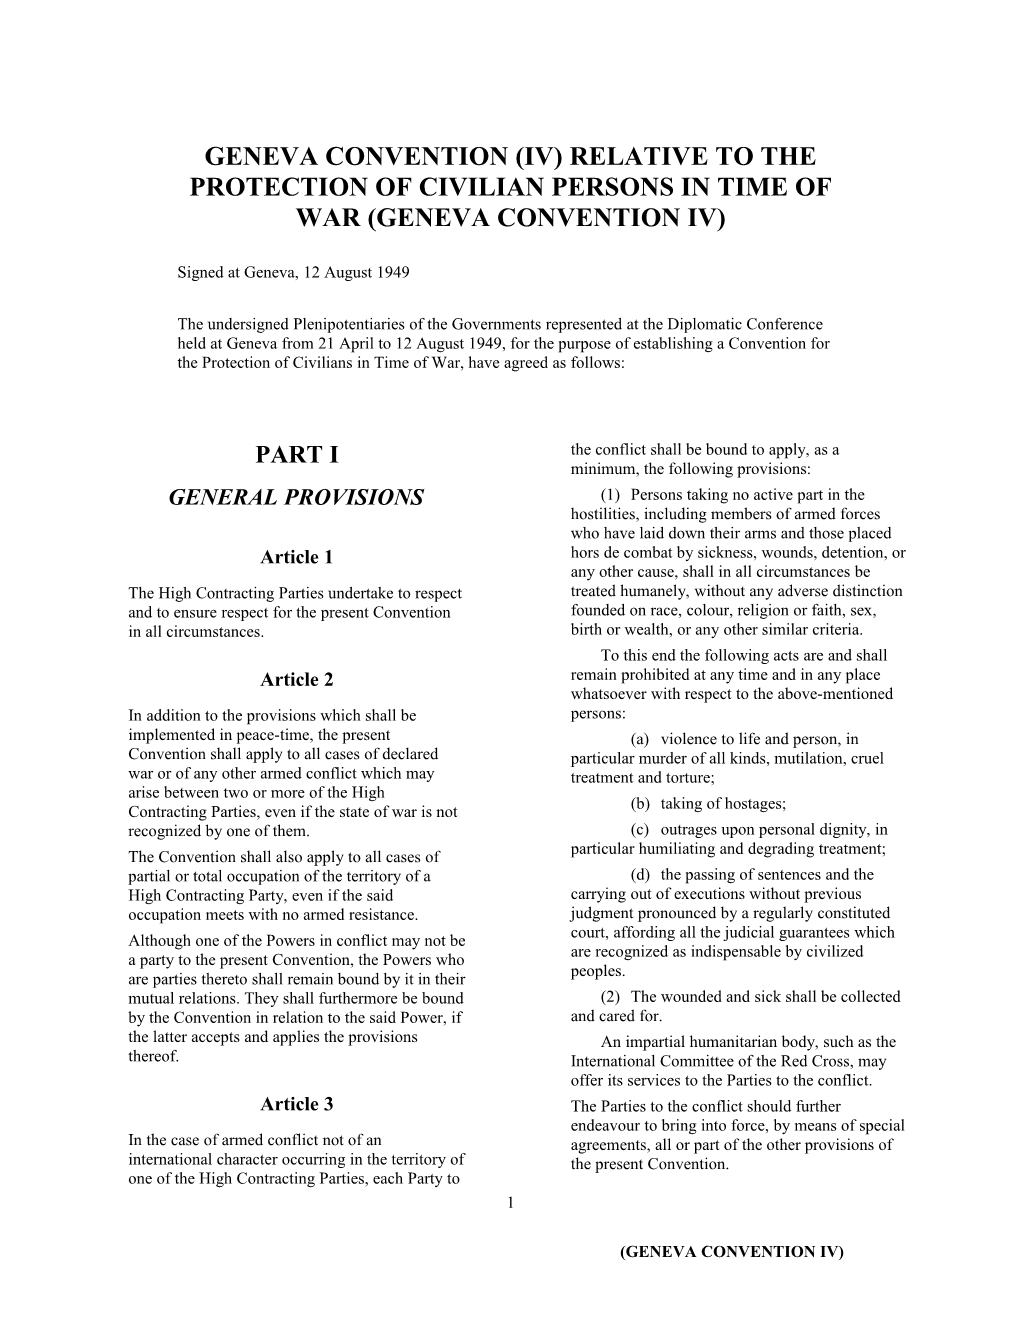 Geneva Convention (Iv) Relative to the Protection of Civilian Persons in Time of War (Geneva